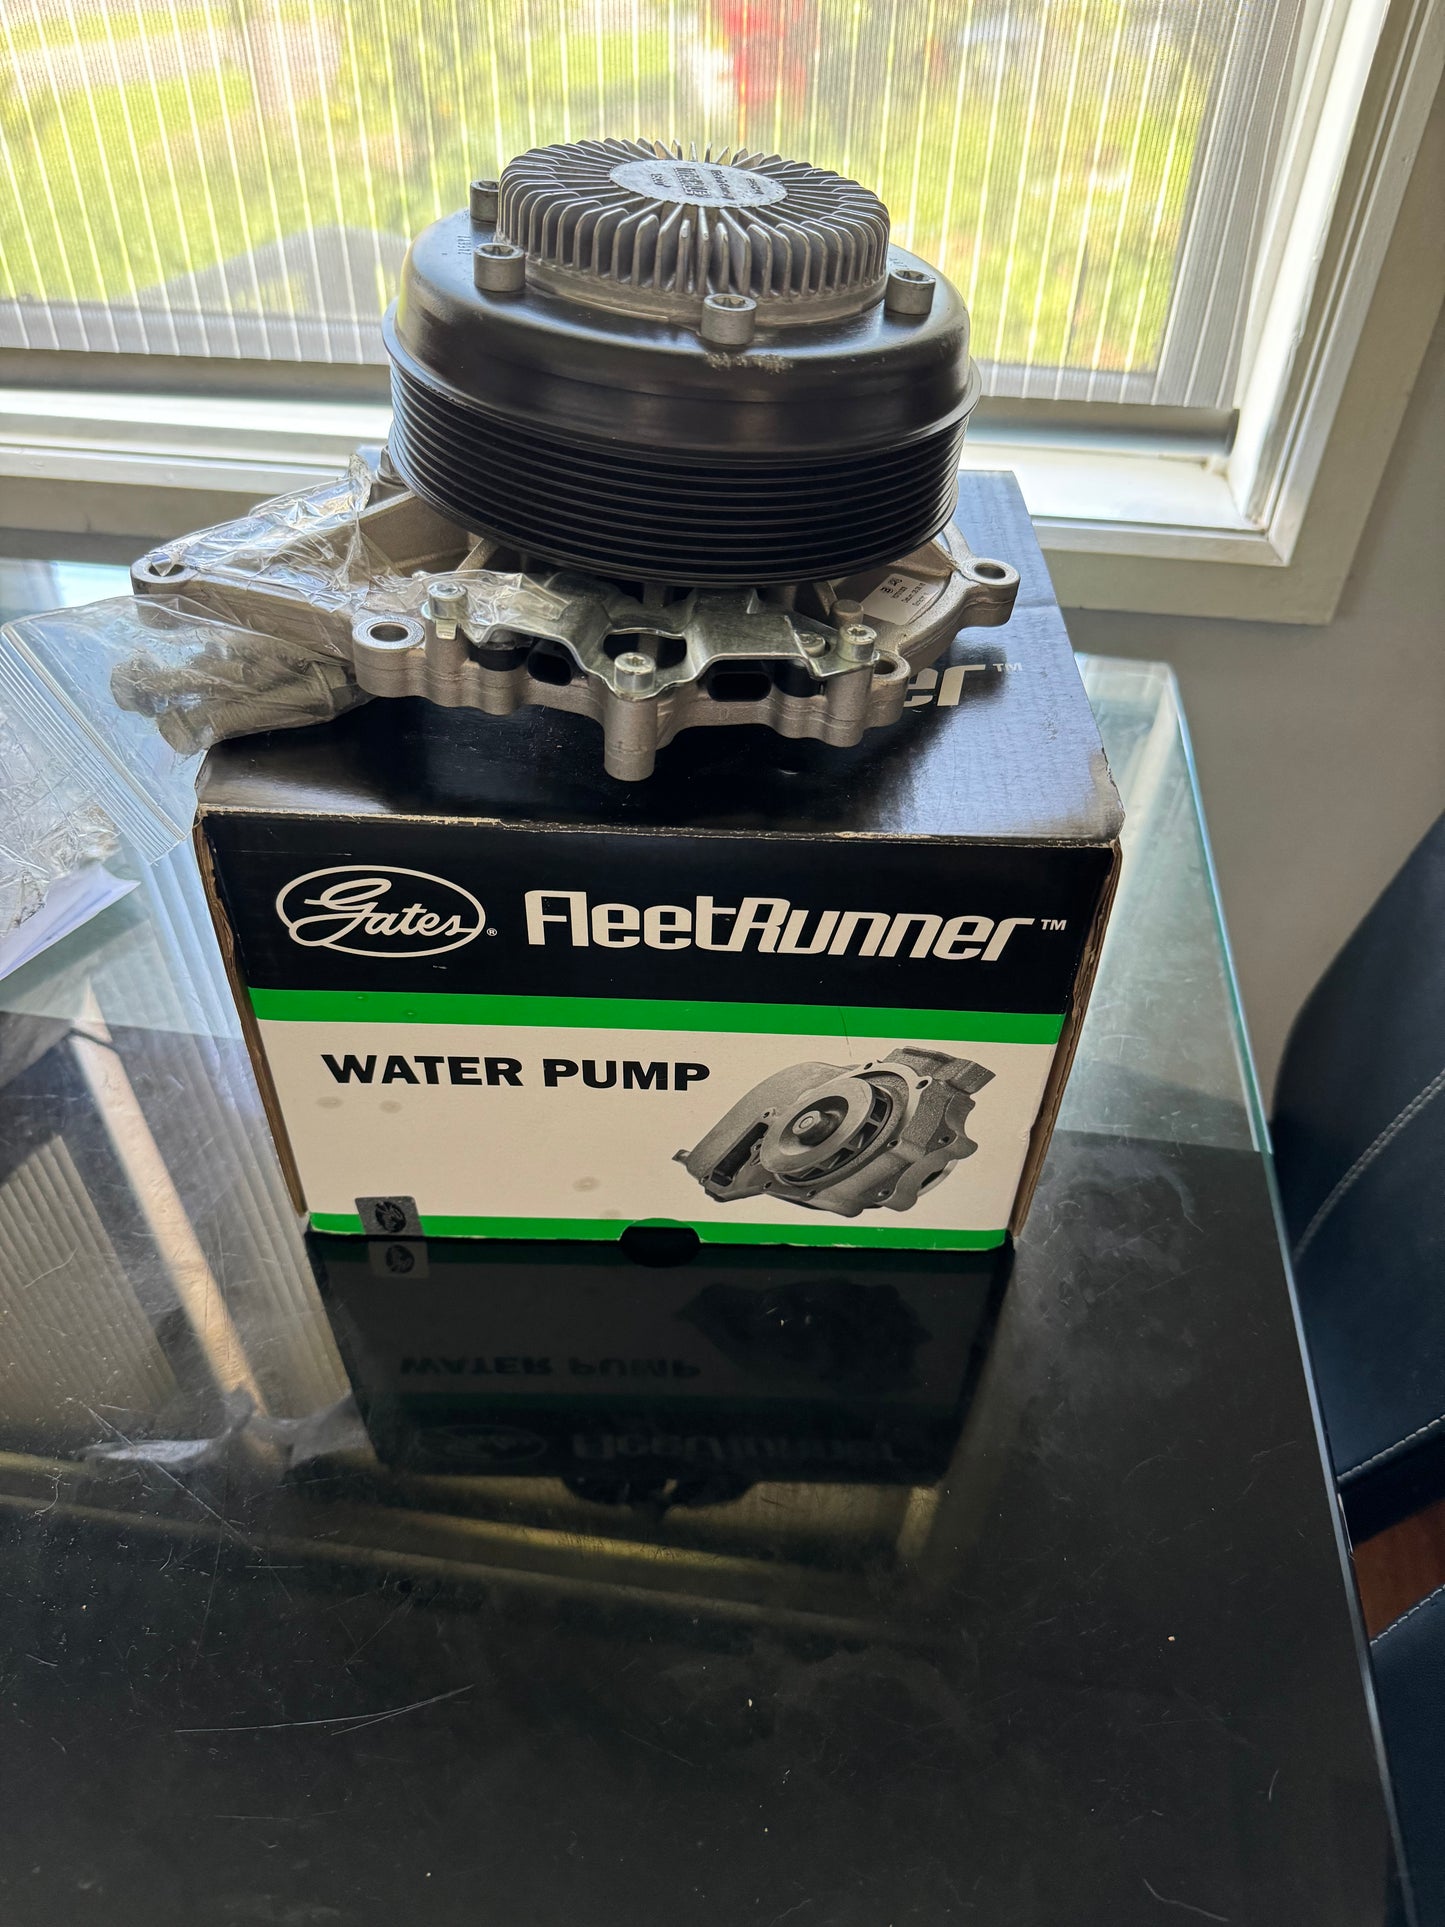 Water pump for mp4